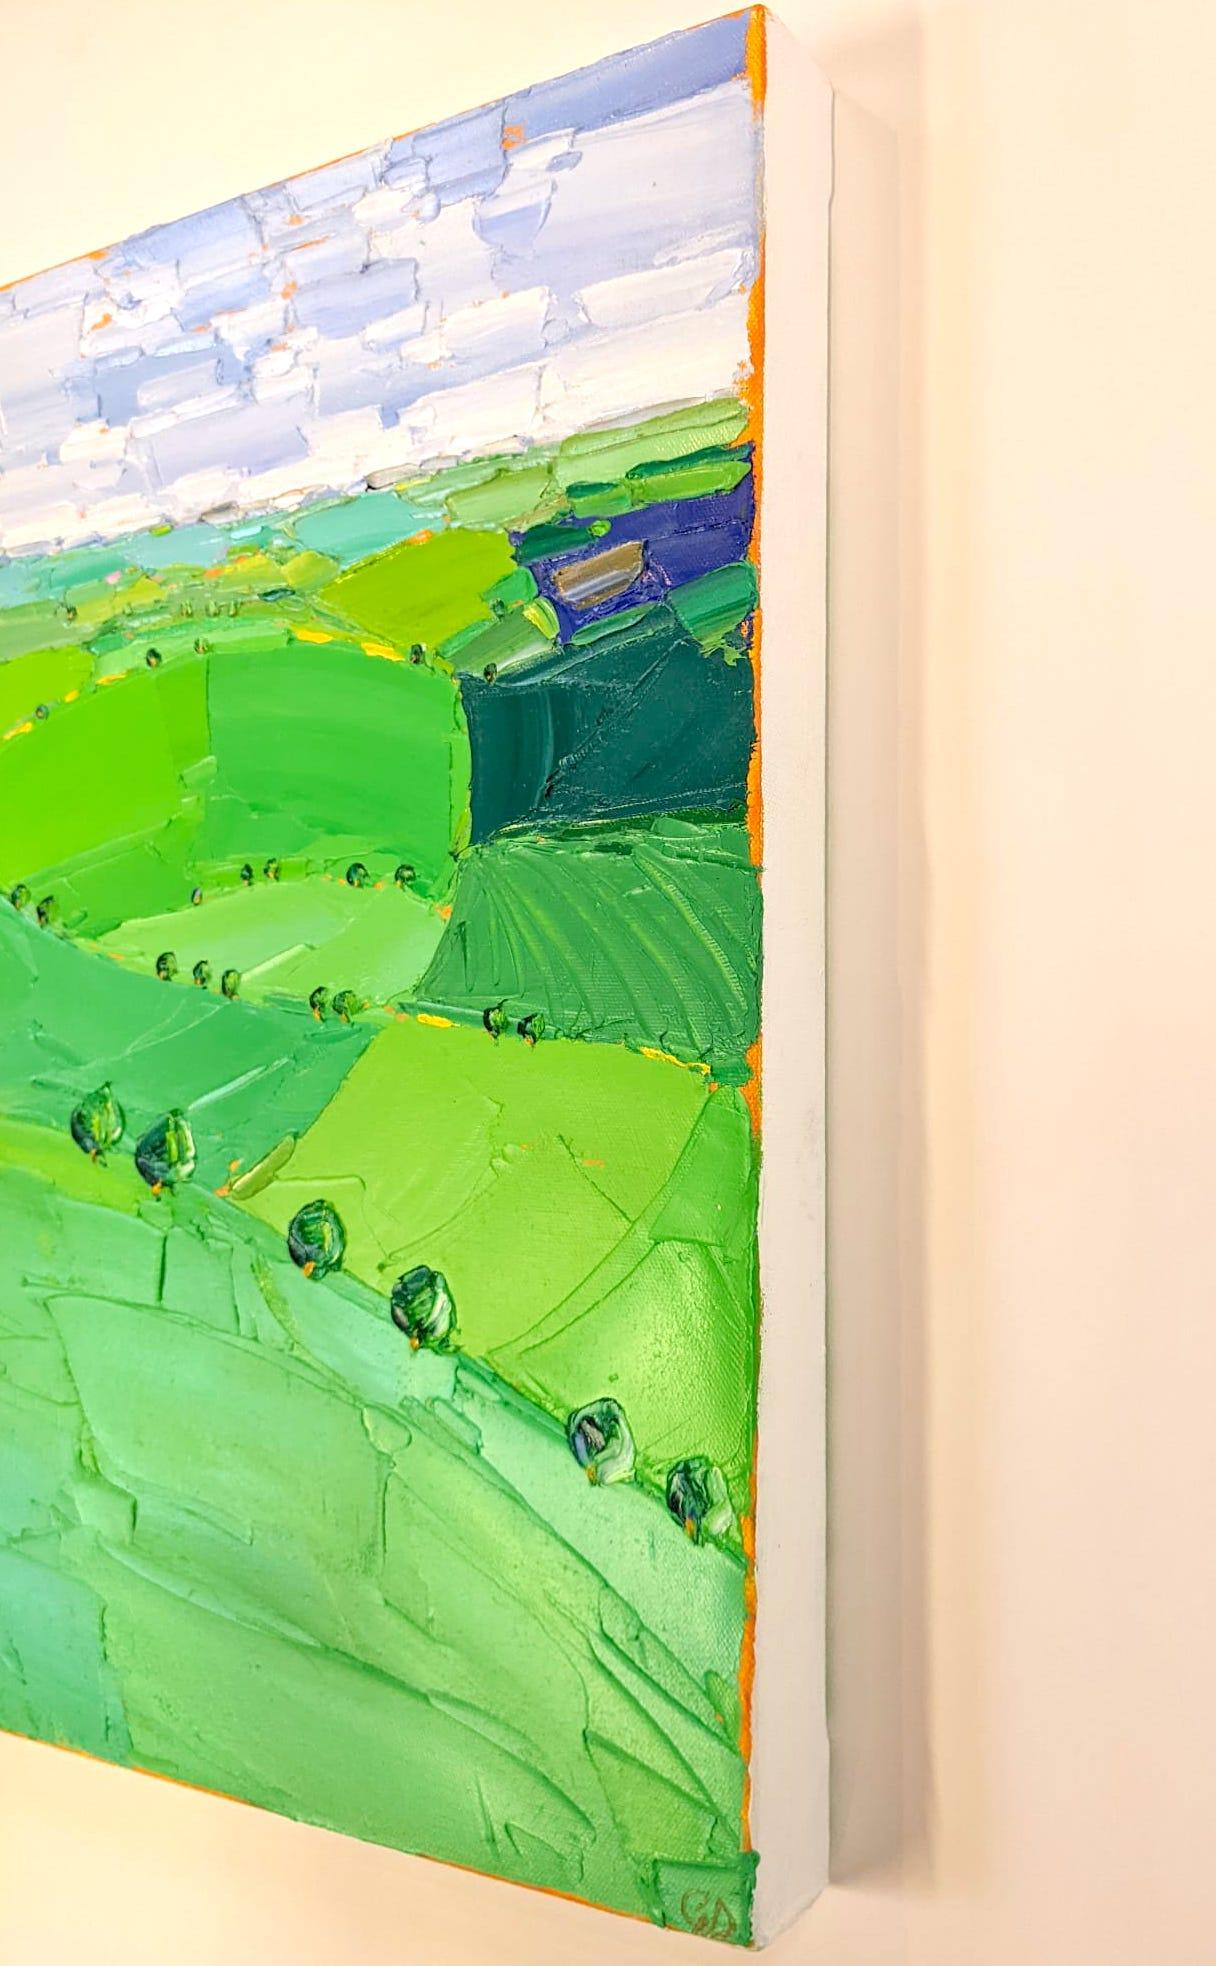 Cotswold Fields II by Georgie Dowling [2022]
original and hand signed by the artist 
Oil paint on canvas
Image size: H:50 cm x W:50 cm
Complete Size of Unframed Work: H:50 cm x W:50 cm x D:4cm
Sold Unframed
Please note that insitu images are purely